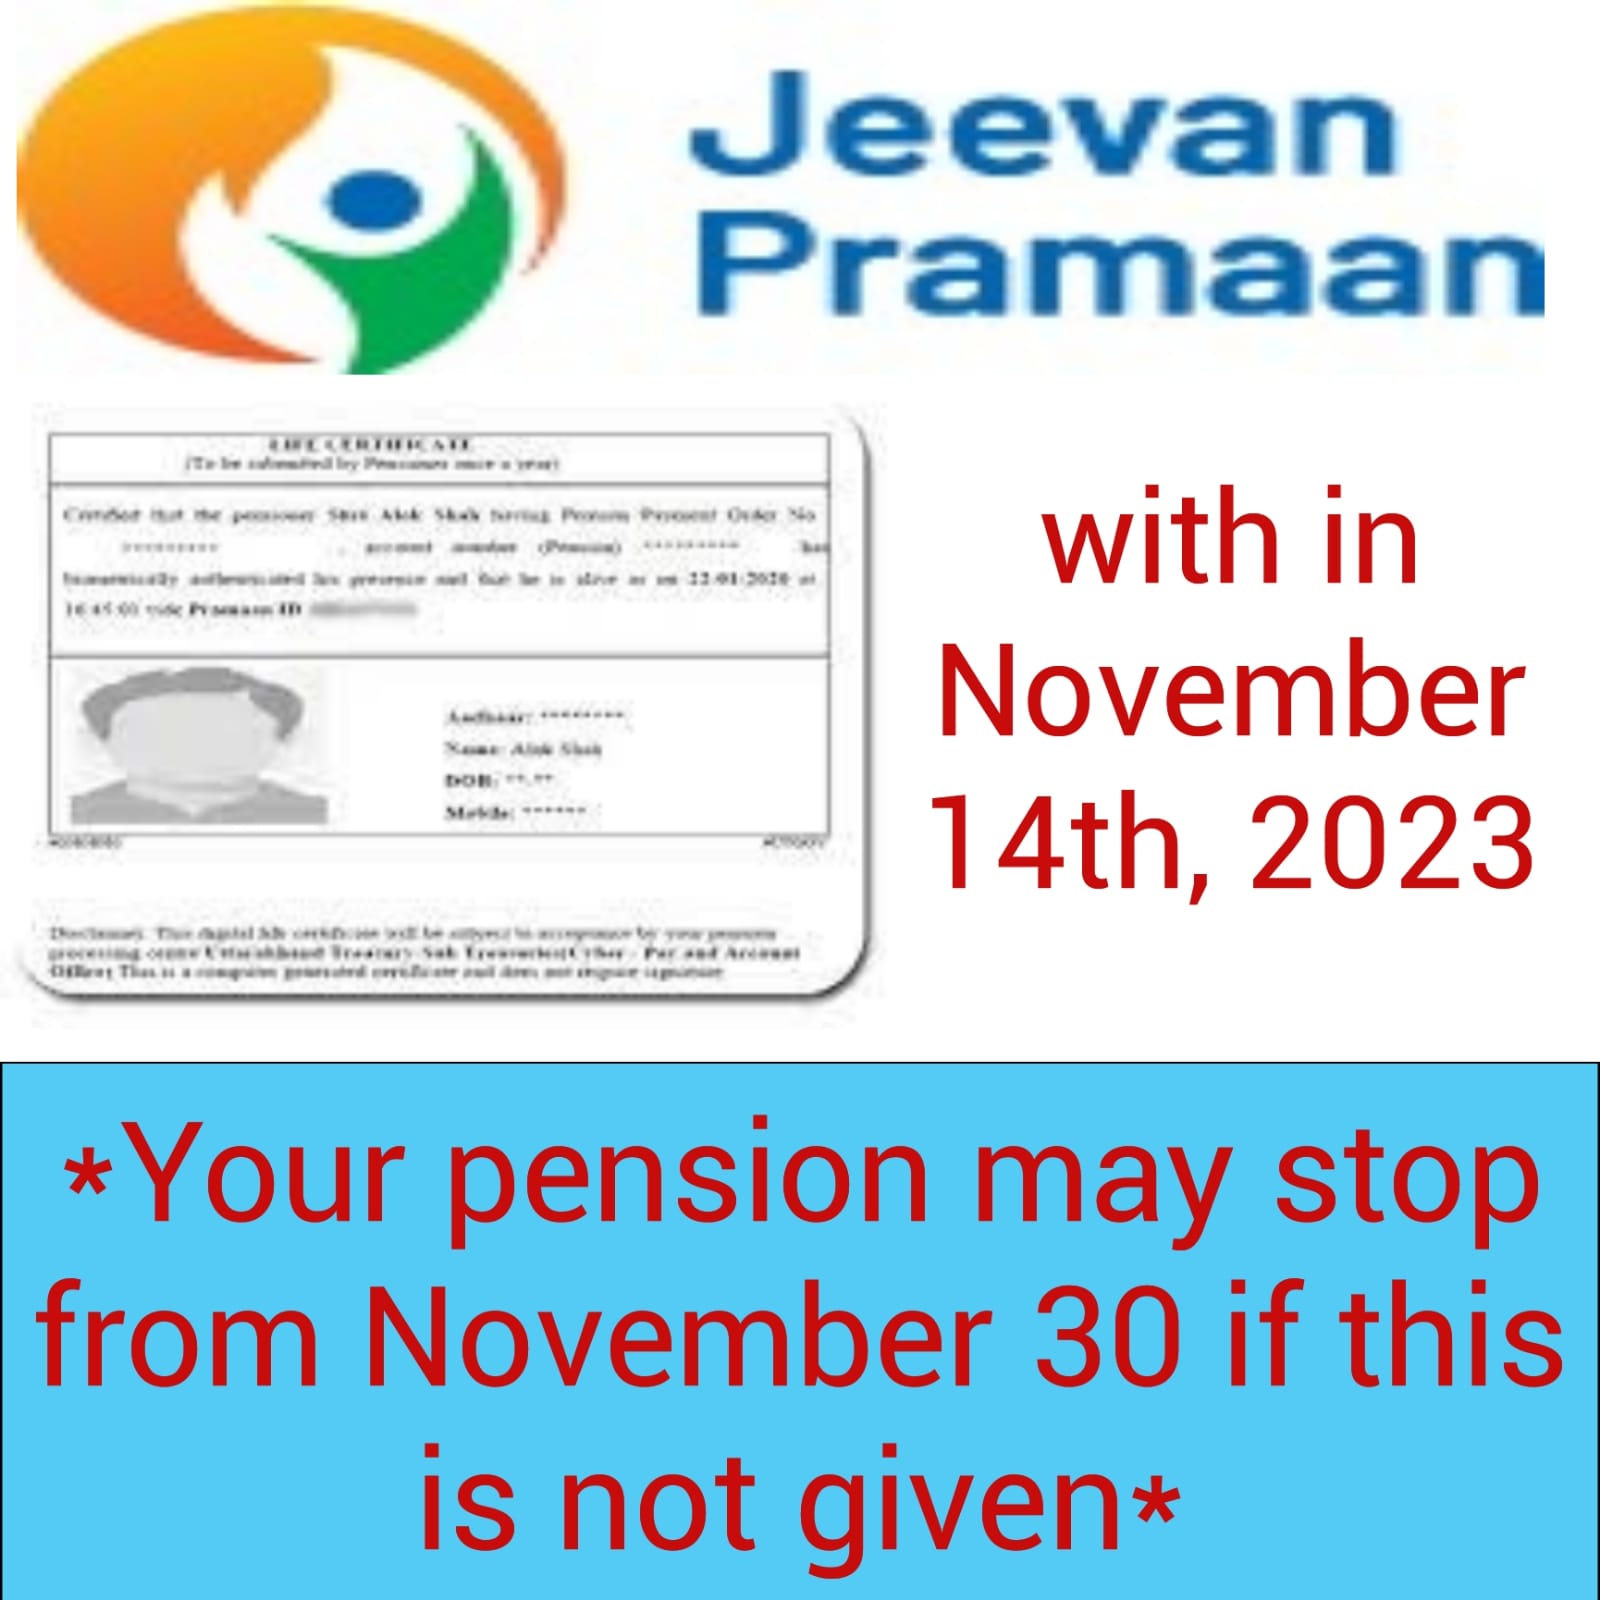 pension may stop from November 30 if this is not given